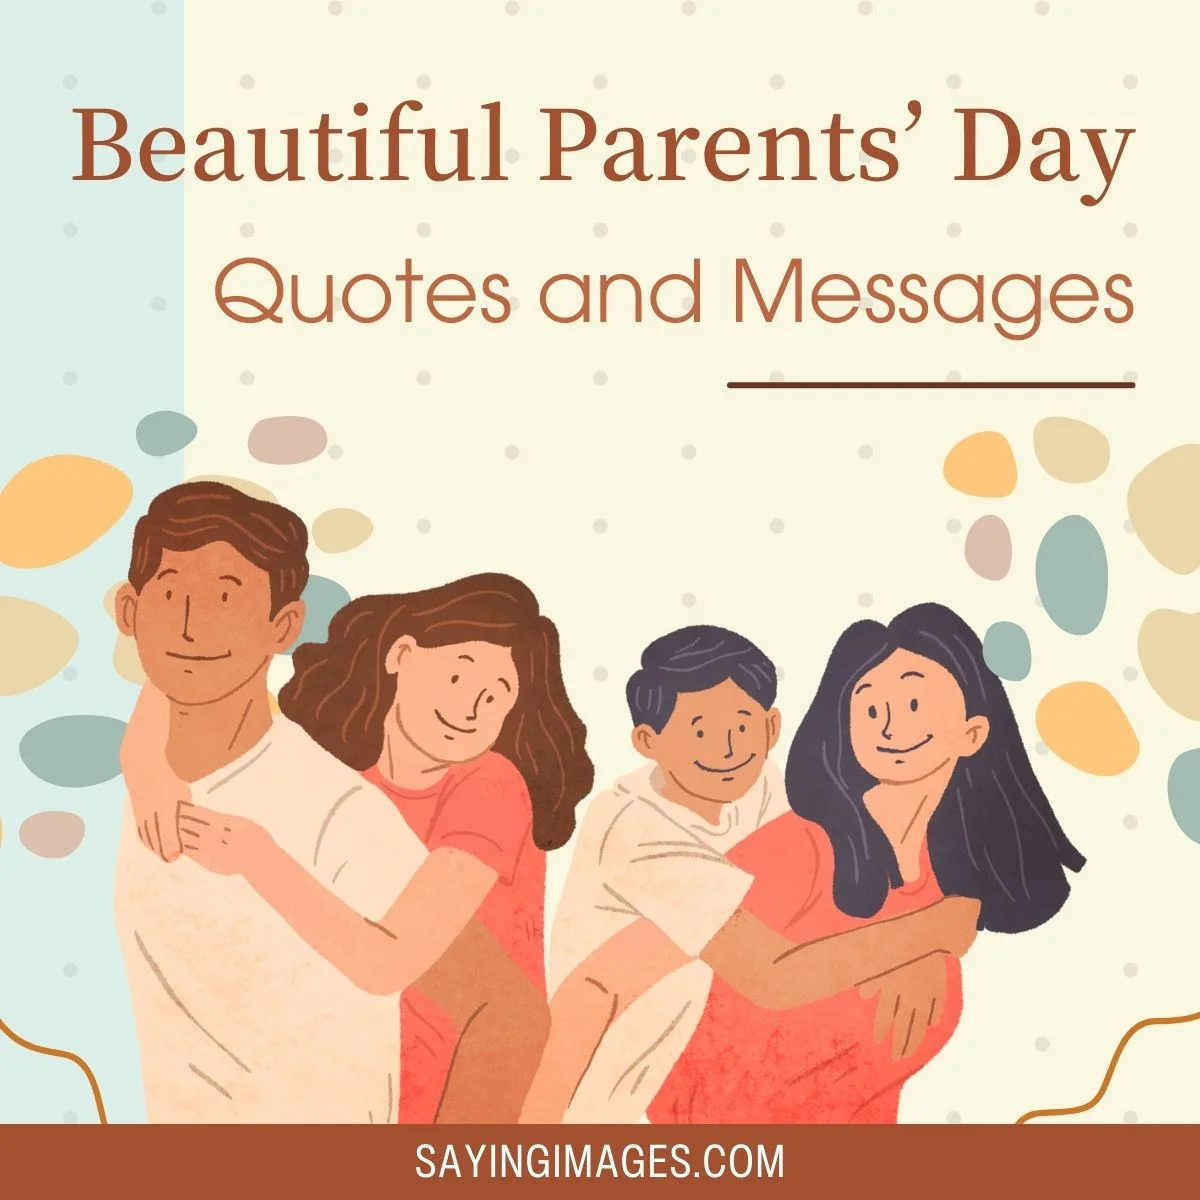 36 Beautiful Parents’ Day Quotes